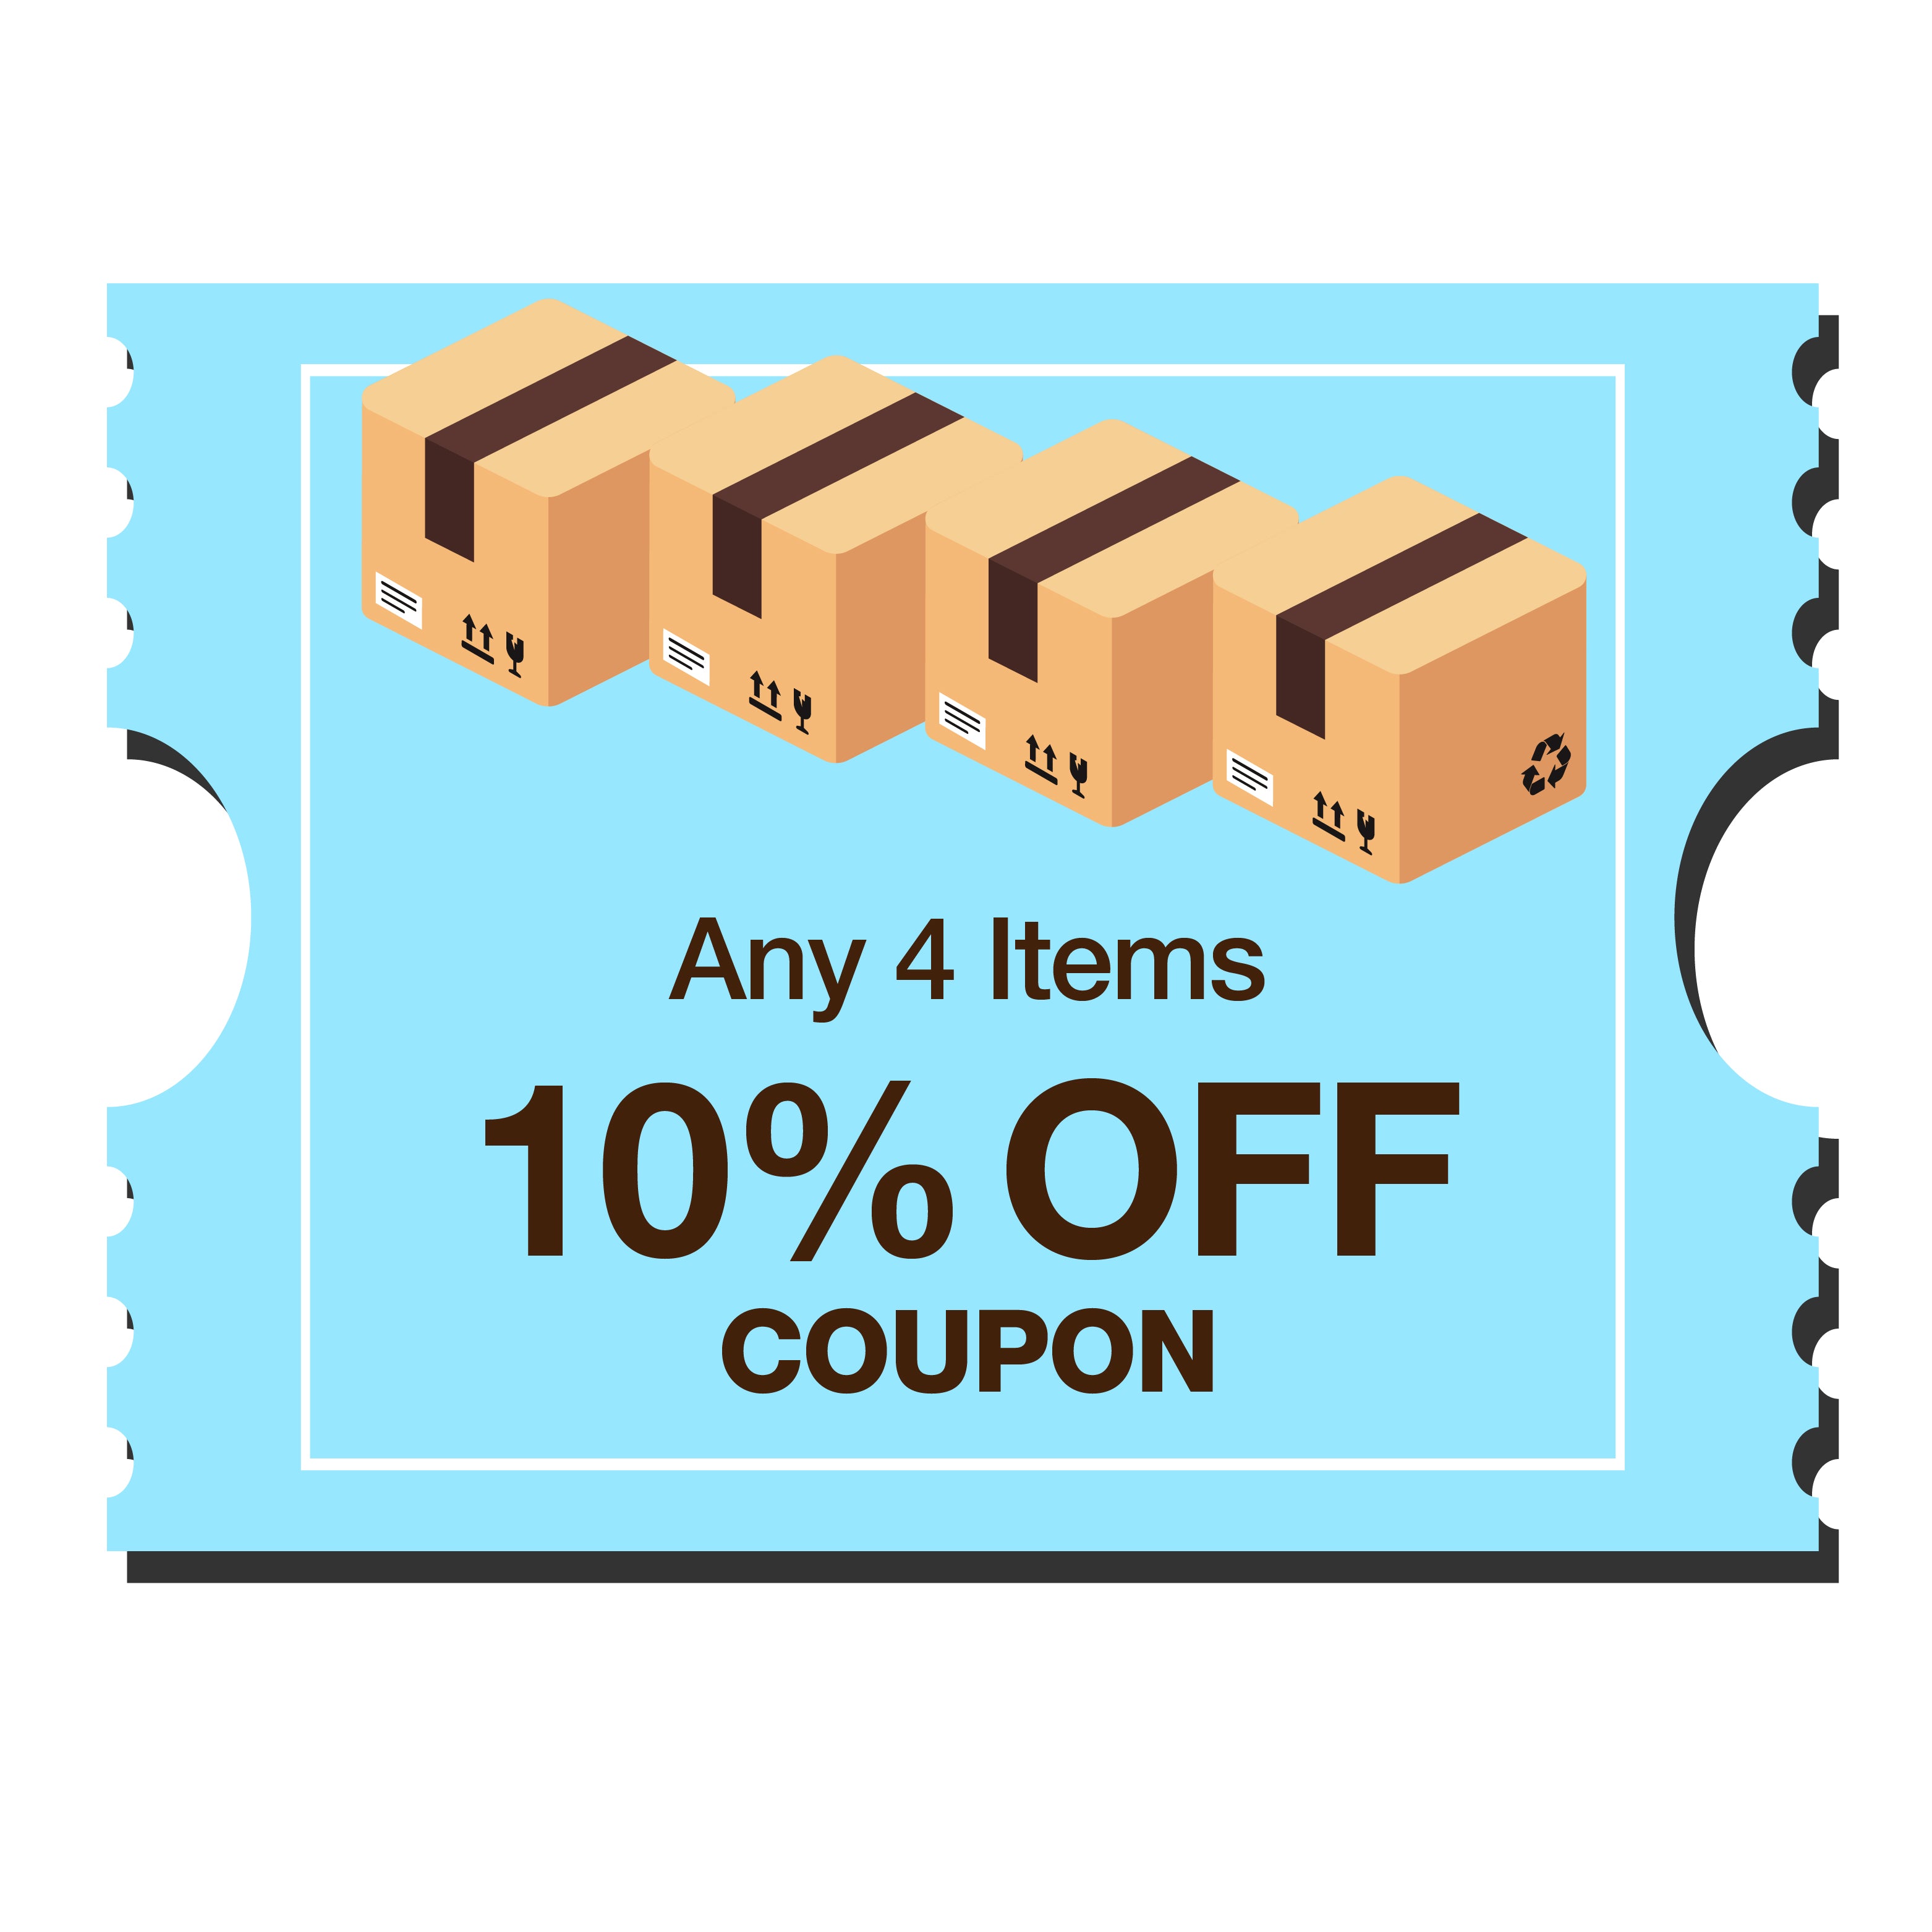 10% OFF Coupon for Any 4 Items